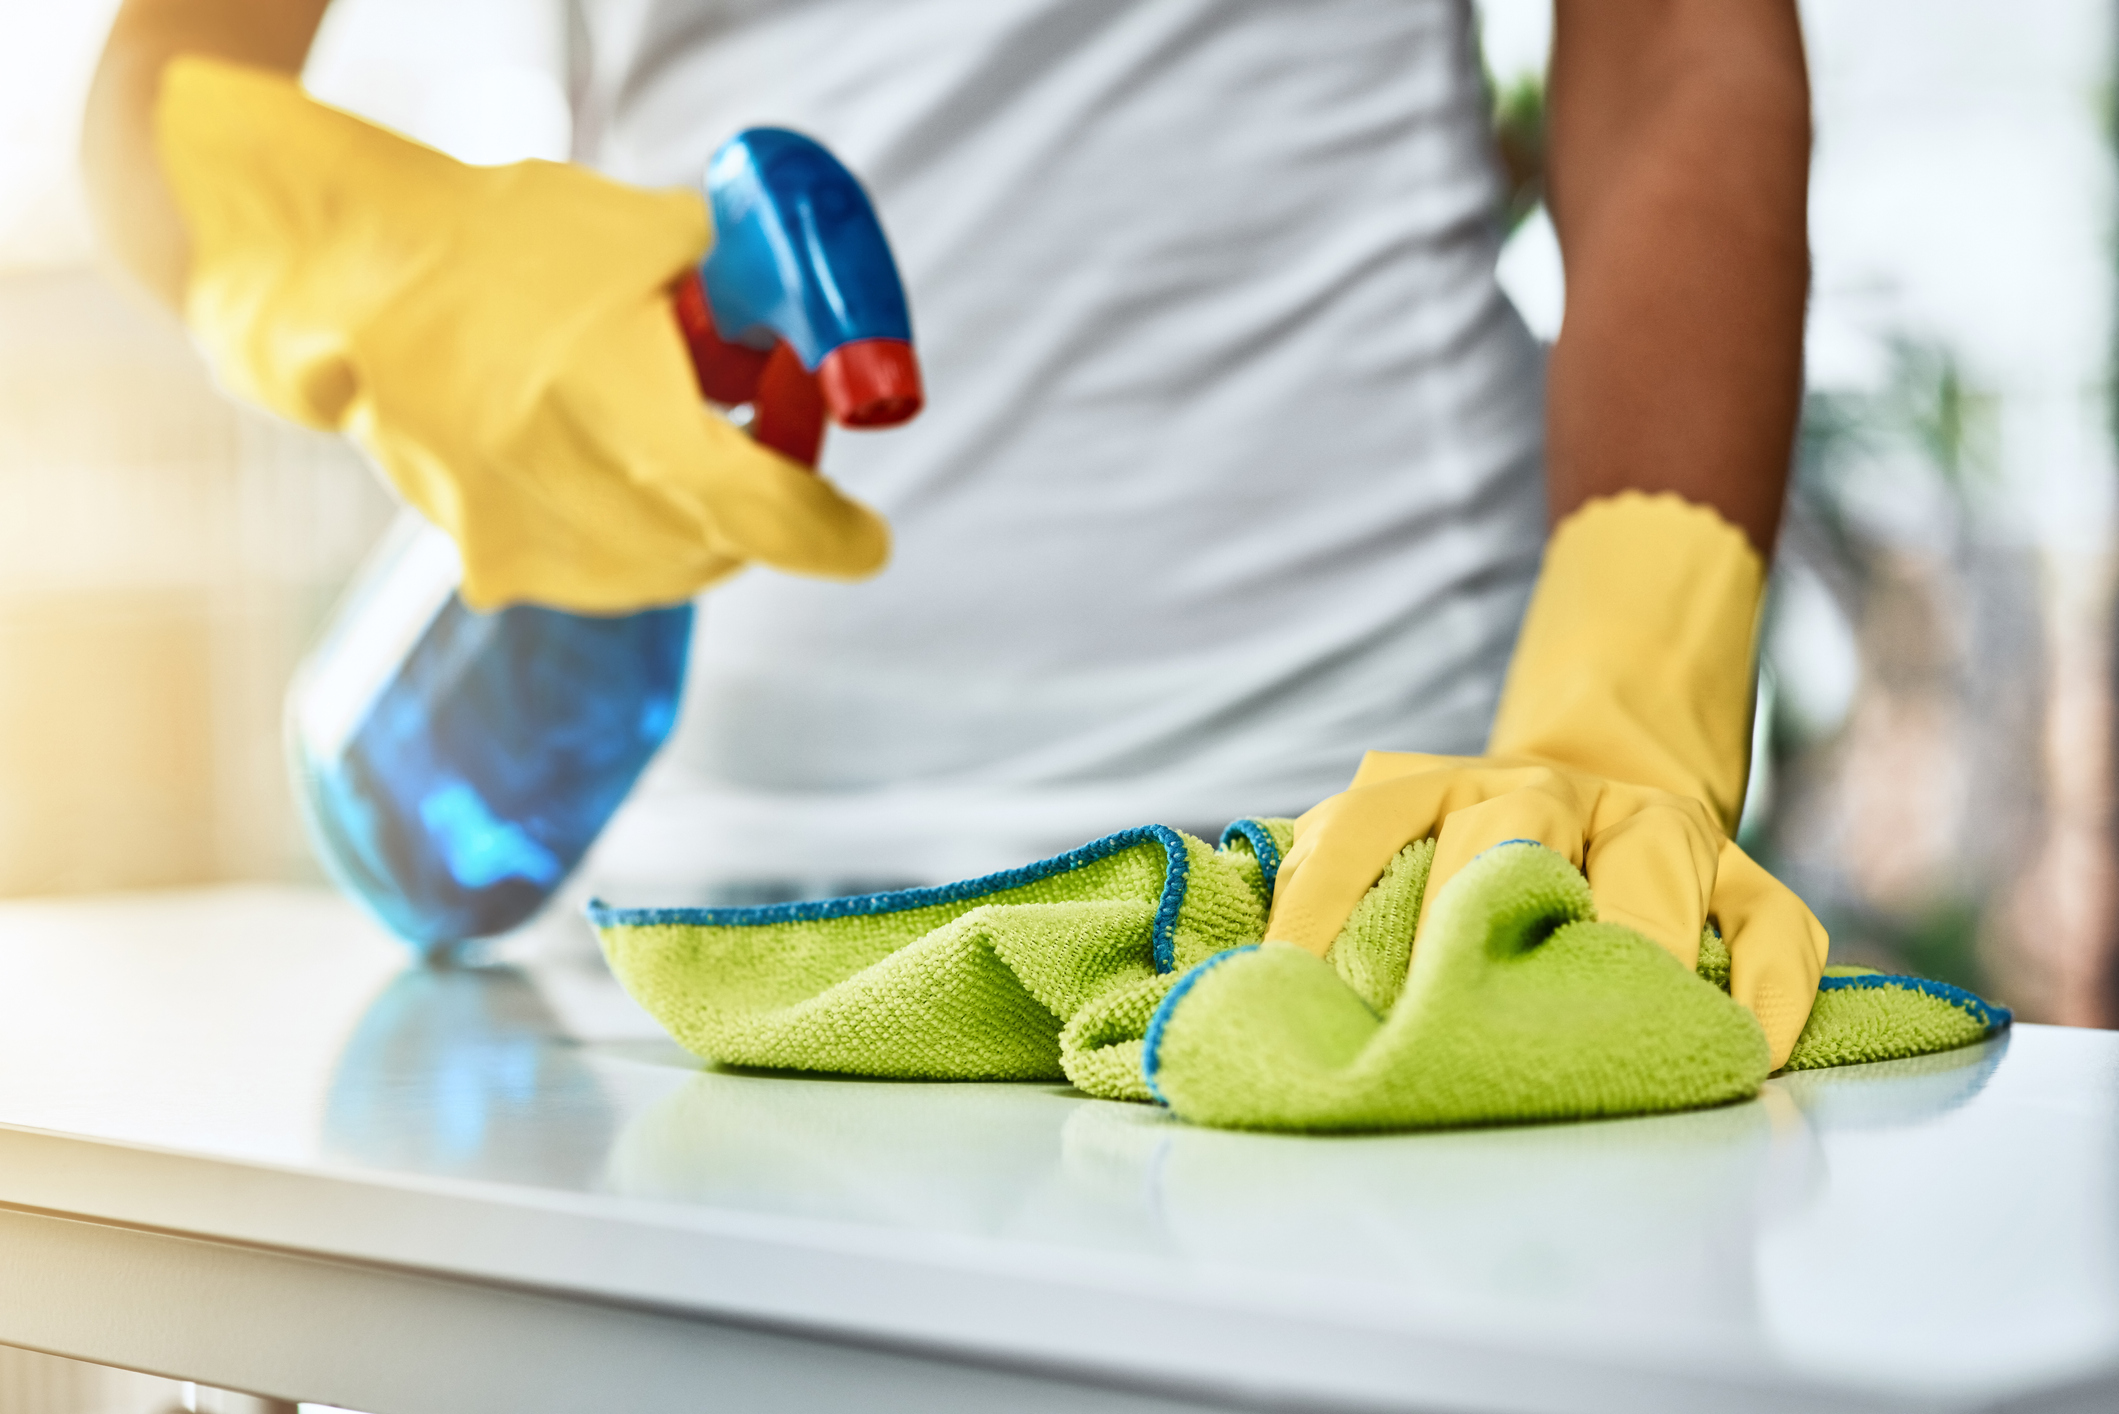 Global Disinfectants Market Is Estimated To Witness High Growth Owing To Increasing Awareness About Hygiene and Rising Demand for Effective Cleaning Solutions